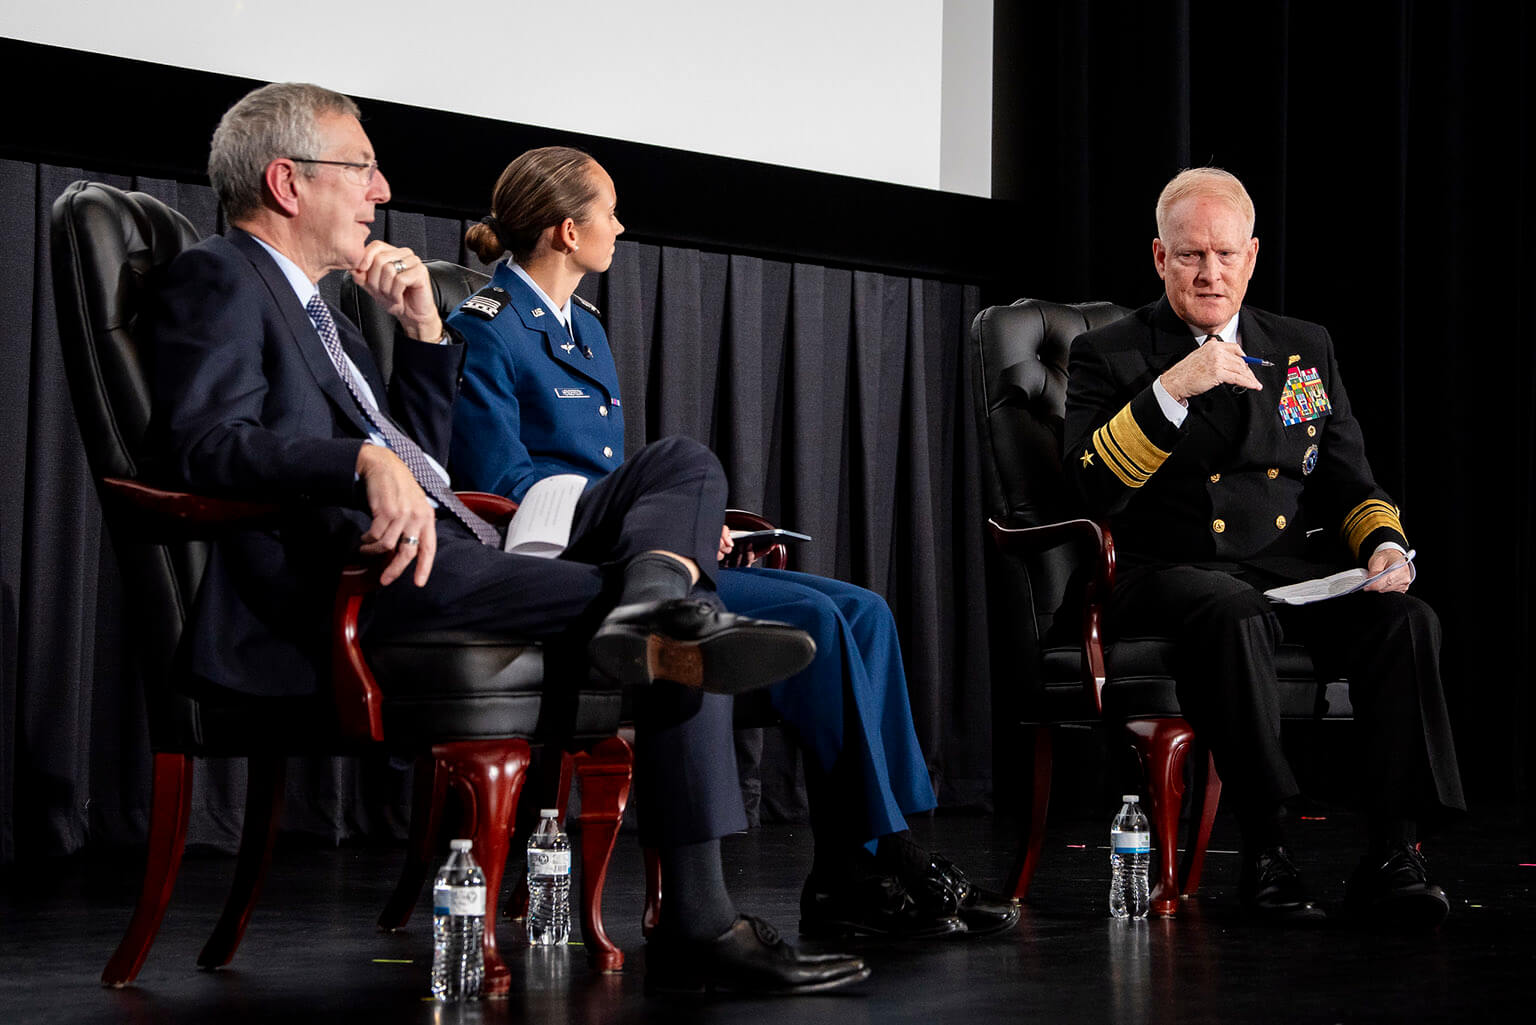 Alan Estevez, U.S. Department of Commerce Industry and Security undersecretary, U.S. Air Force Academy Cadet 1st Class Mary Henderson, and Vice Admiral Frank Whitworth, National Geospatial-Intelligence Agency director